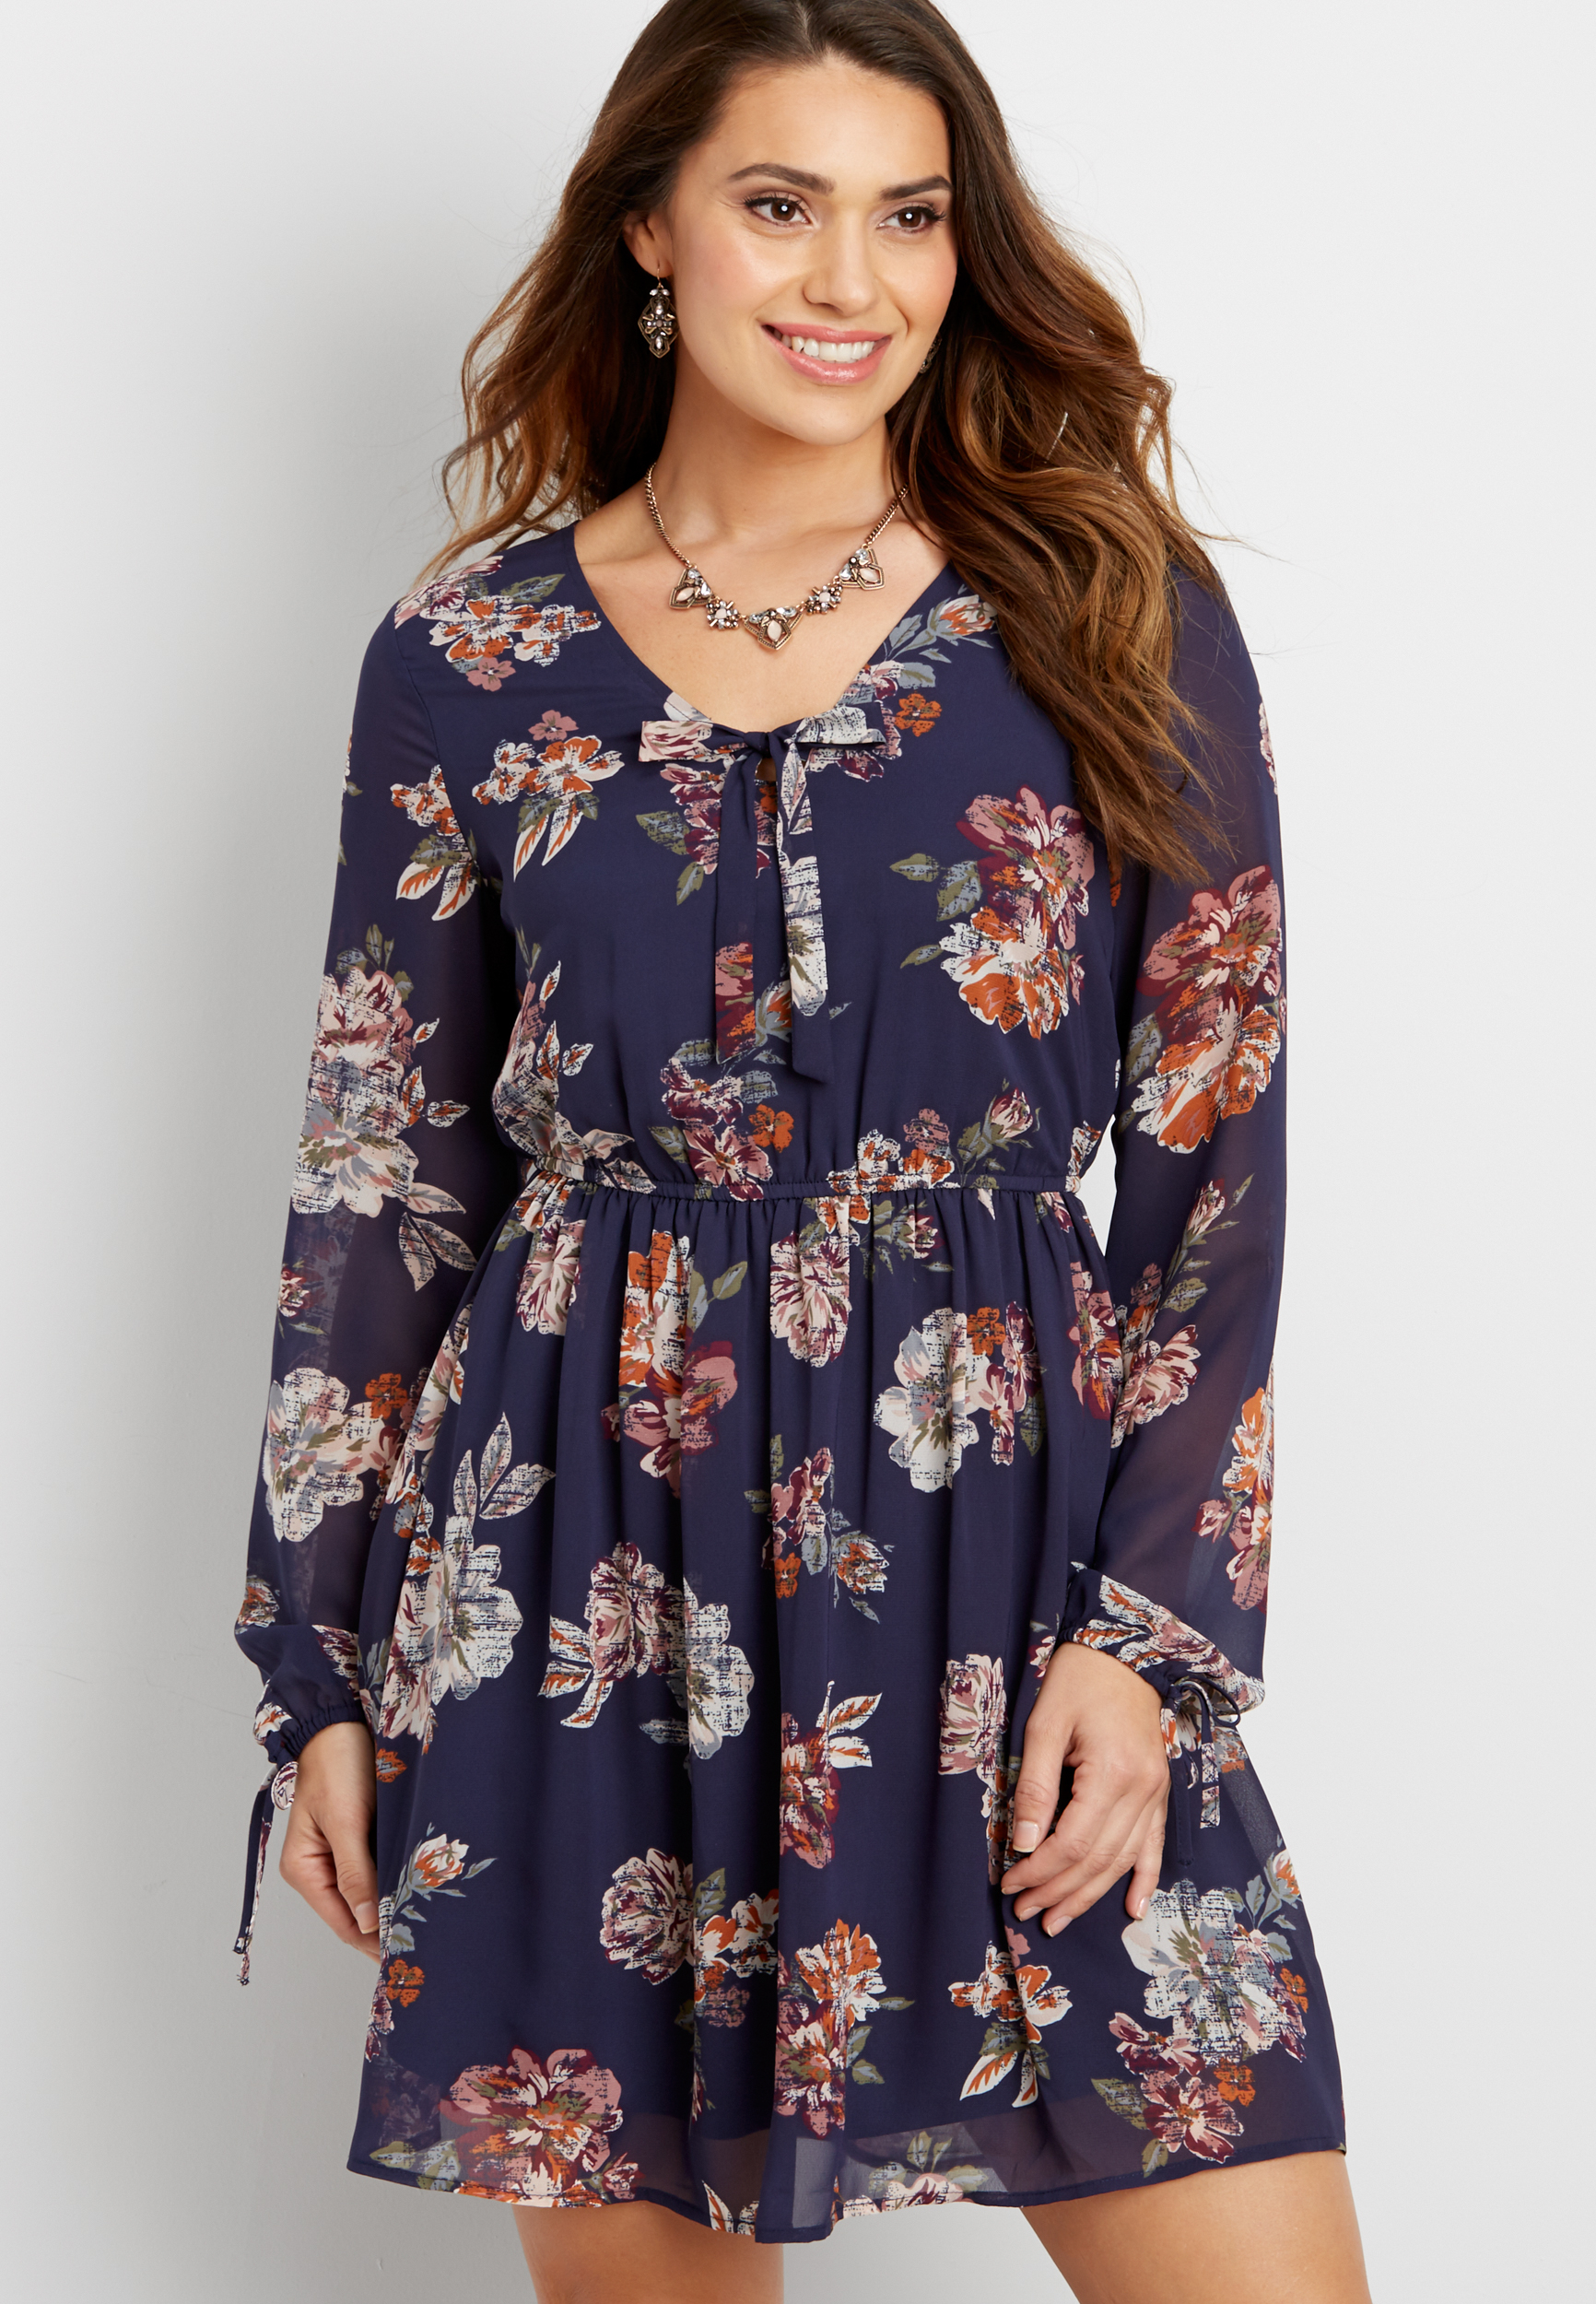 floral print chiffon dress with long sleeves | maurices